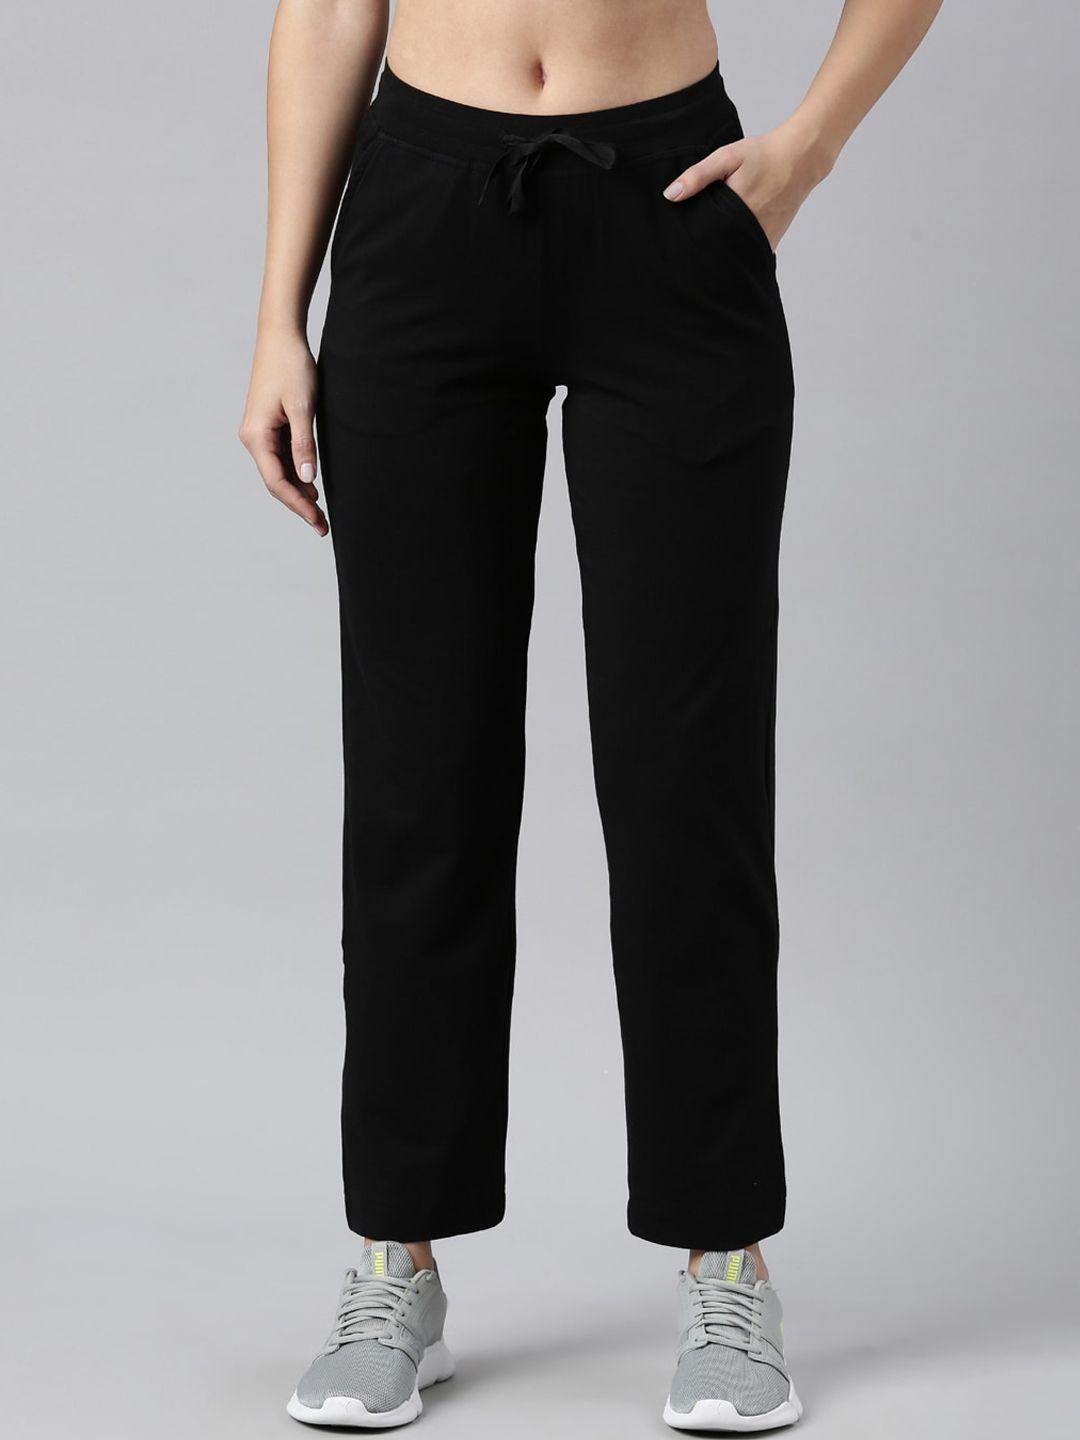 go-colors-women-relaxed-fit-track-pants